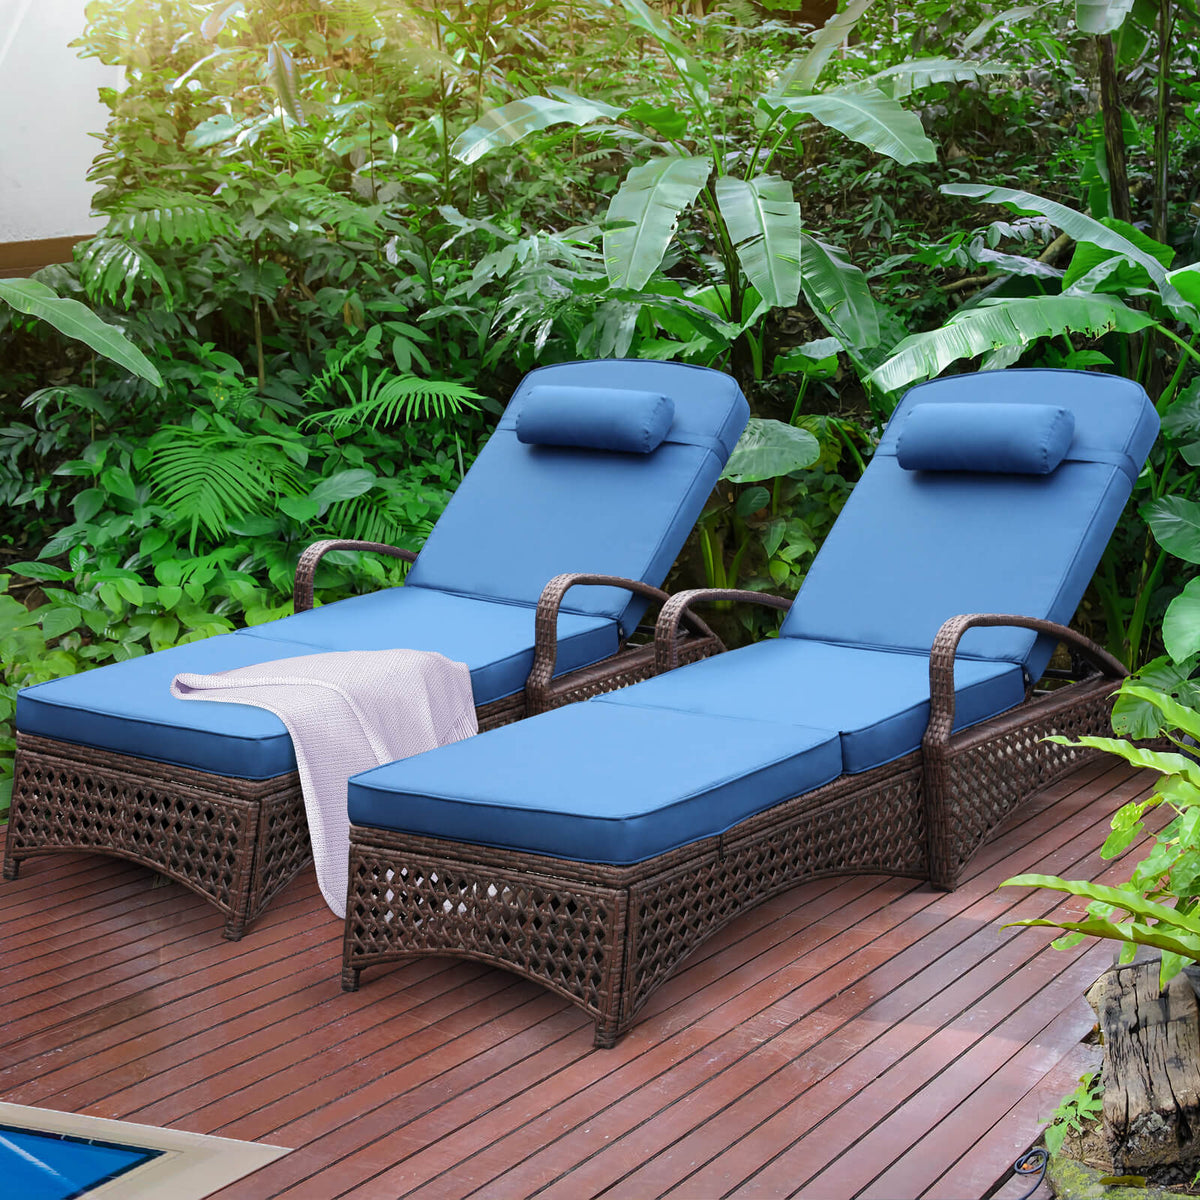 2 Pcs Patio Chaise Lounge Chairs w/ 6 Reclining Positions, 2 Wheels & 1 Small Pillow, Blue Cushion